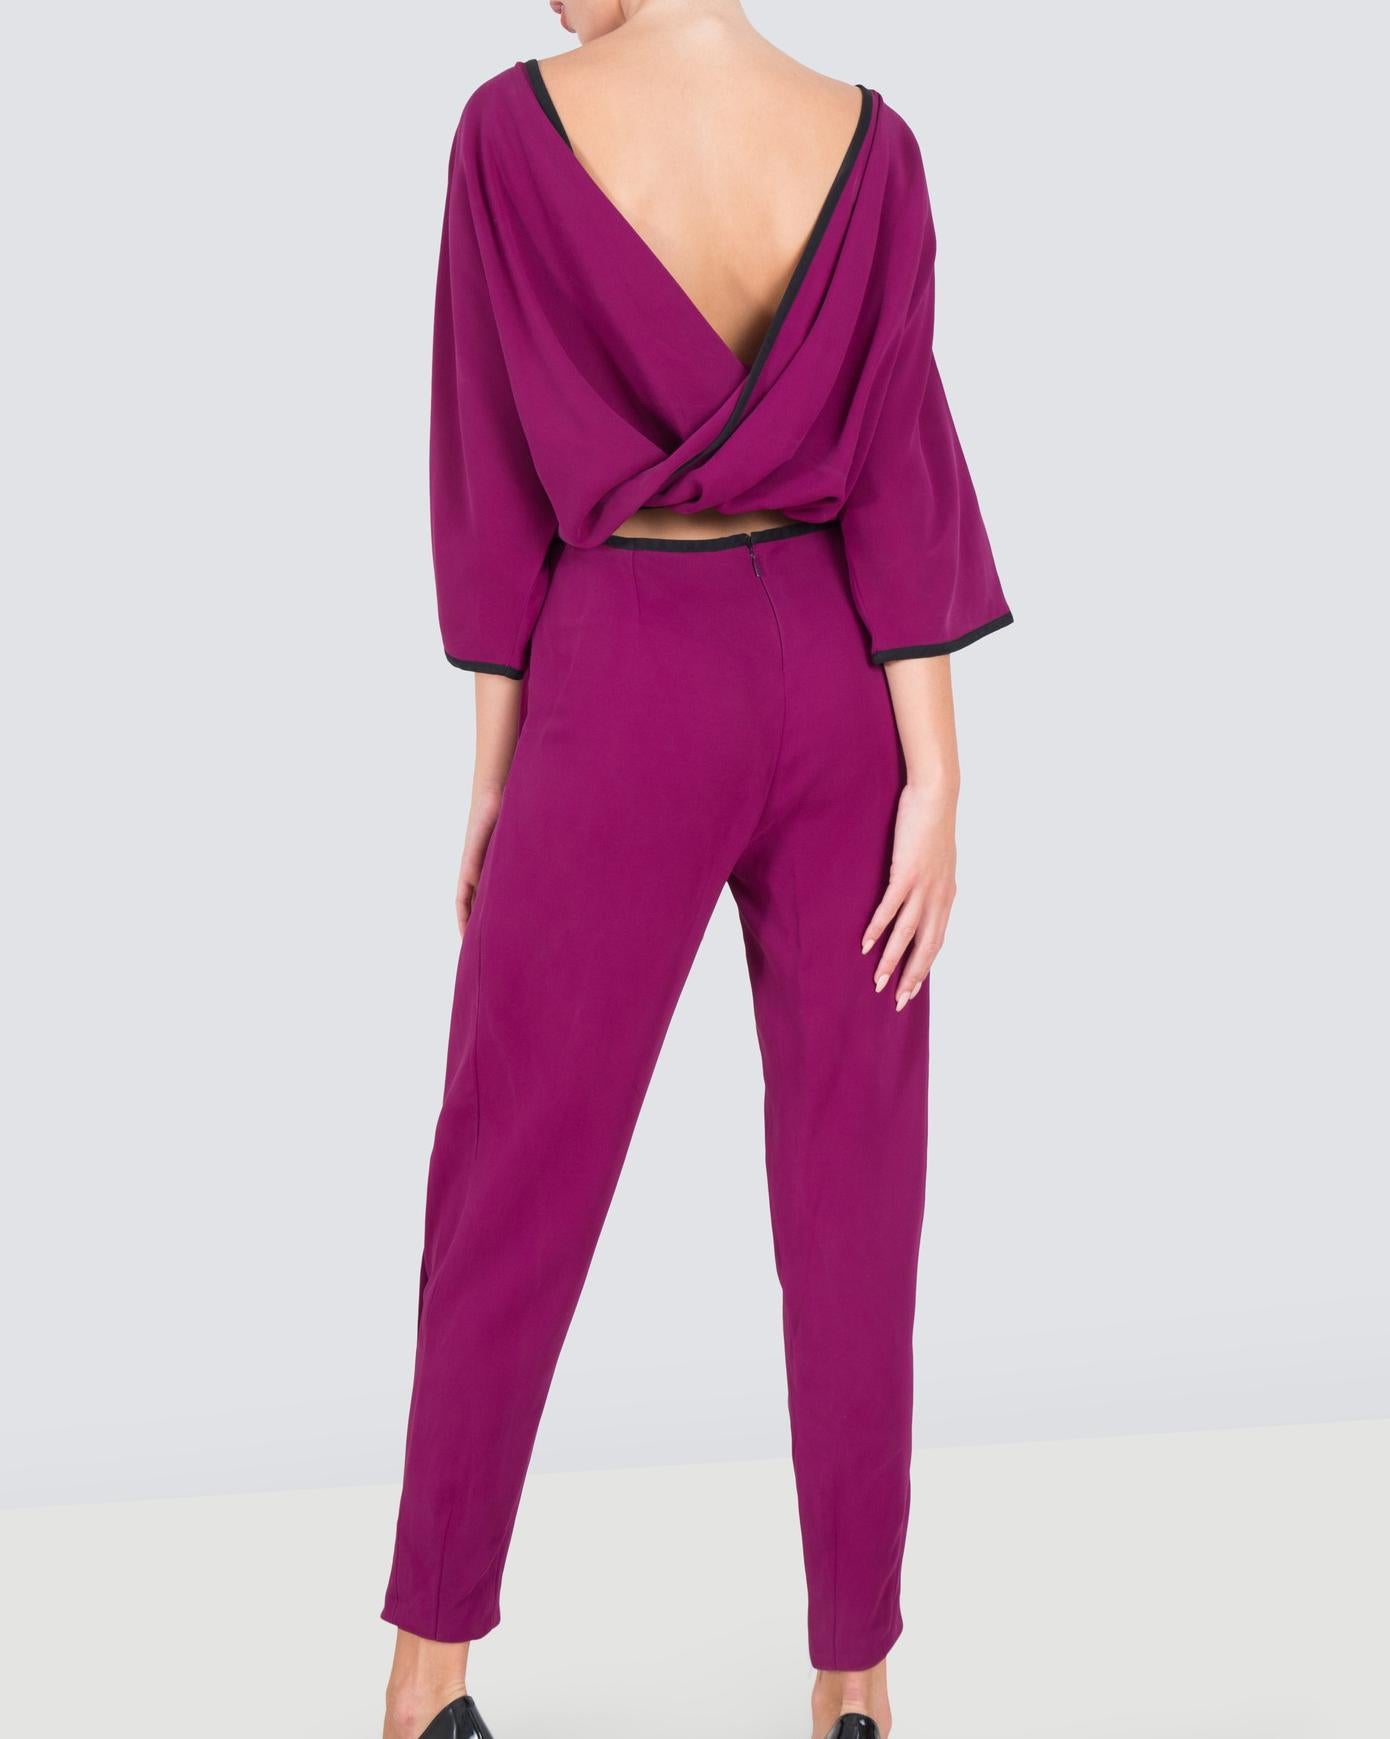 Gucci S/S 2014 silk magenta black backless dolman tapered pant jumpsuit  For Sale 8